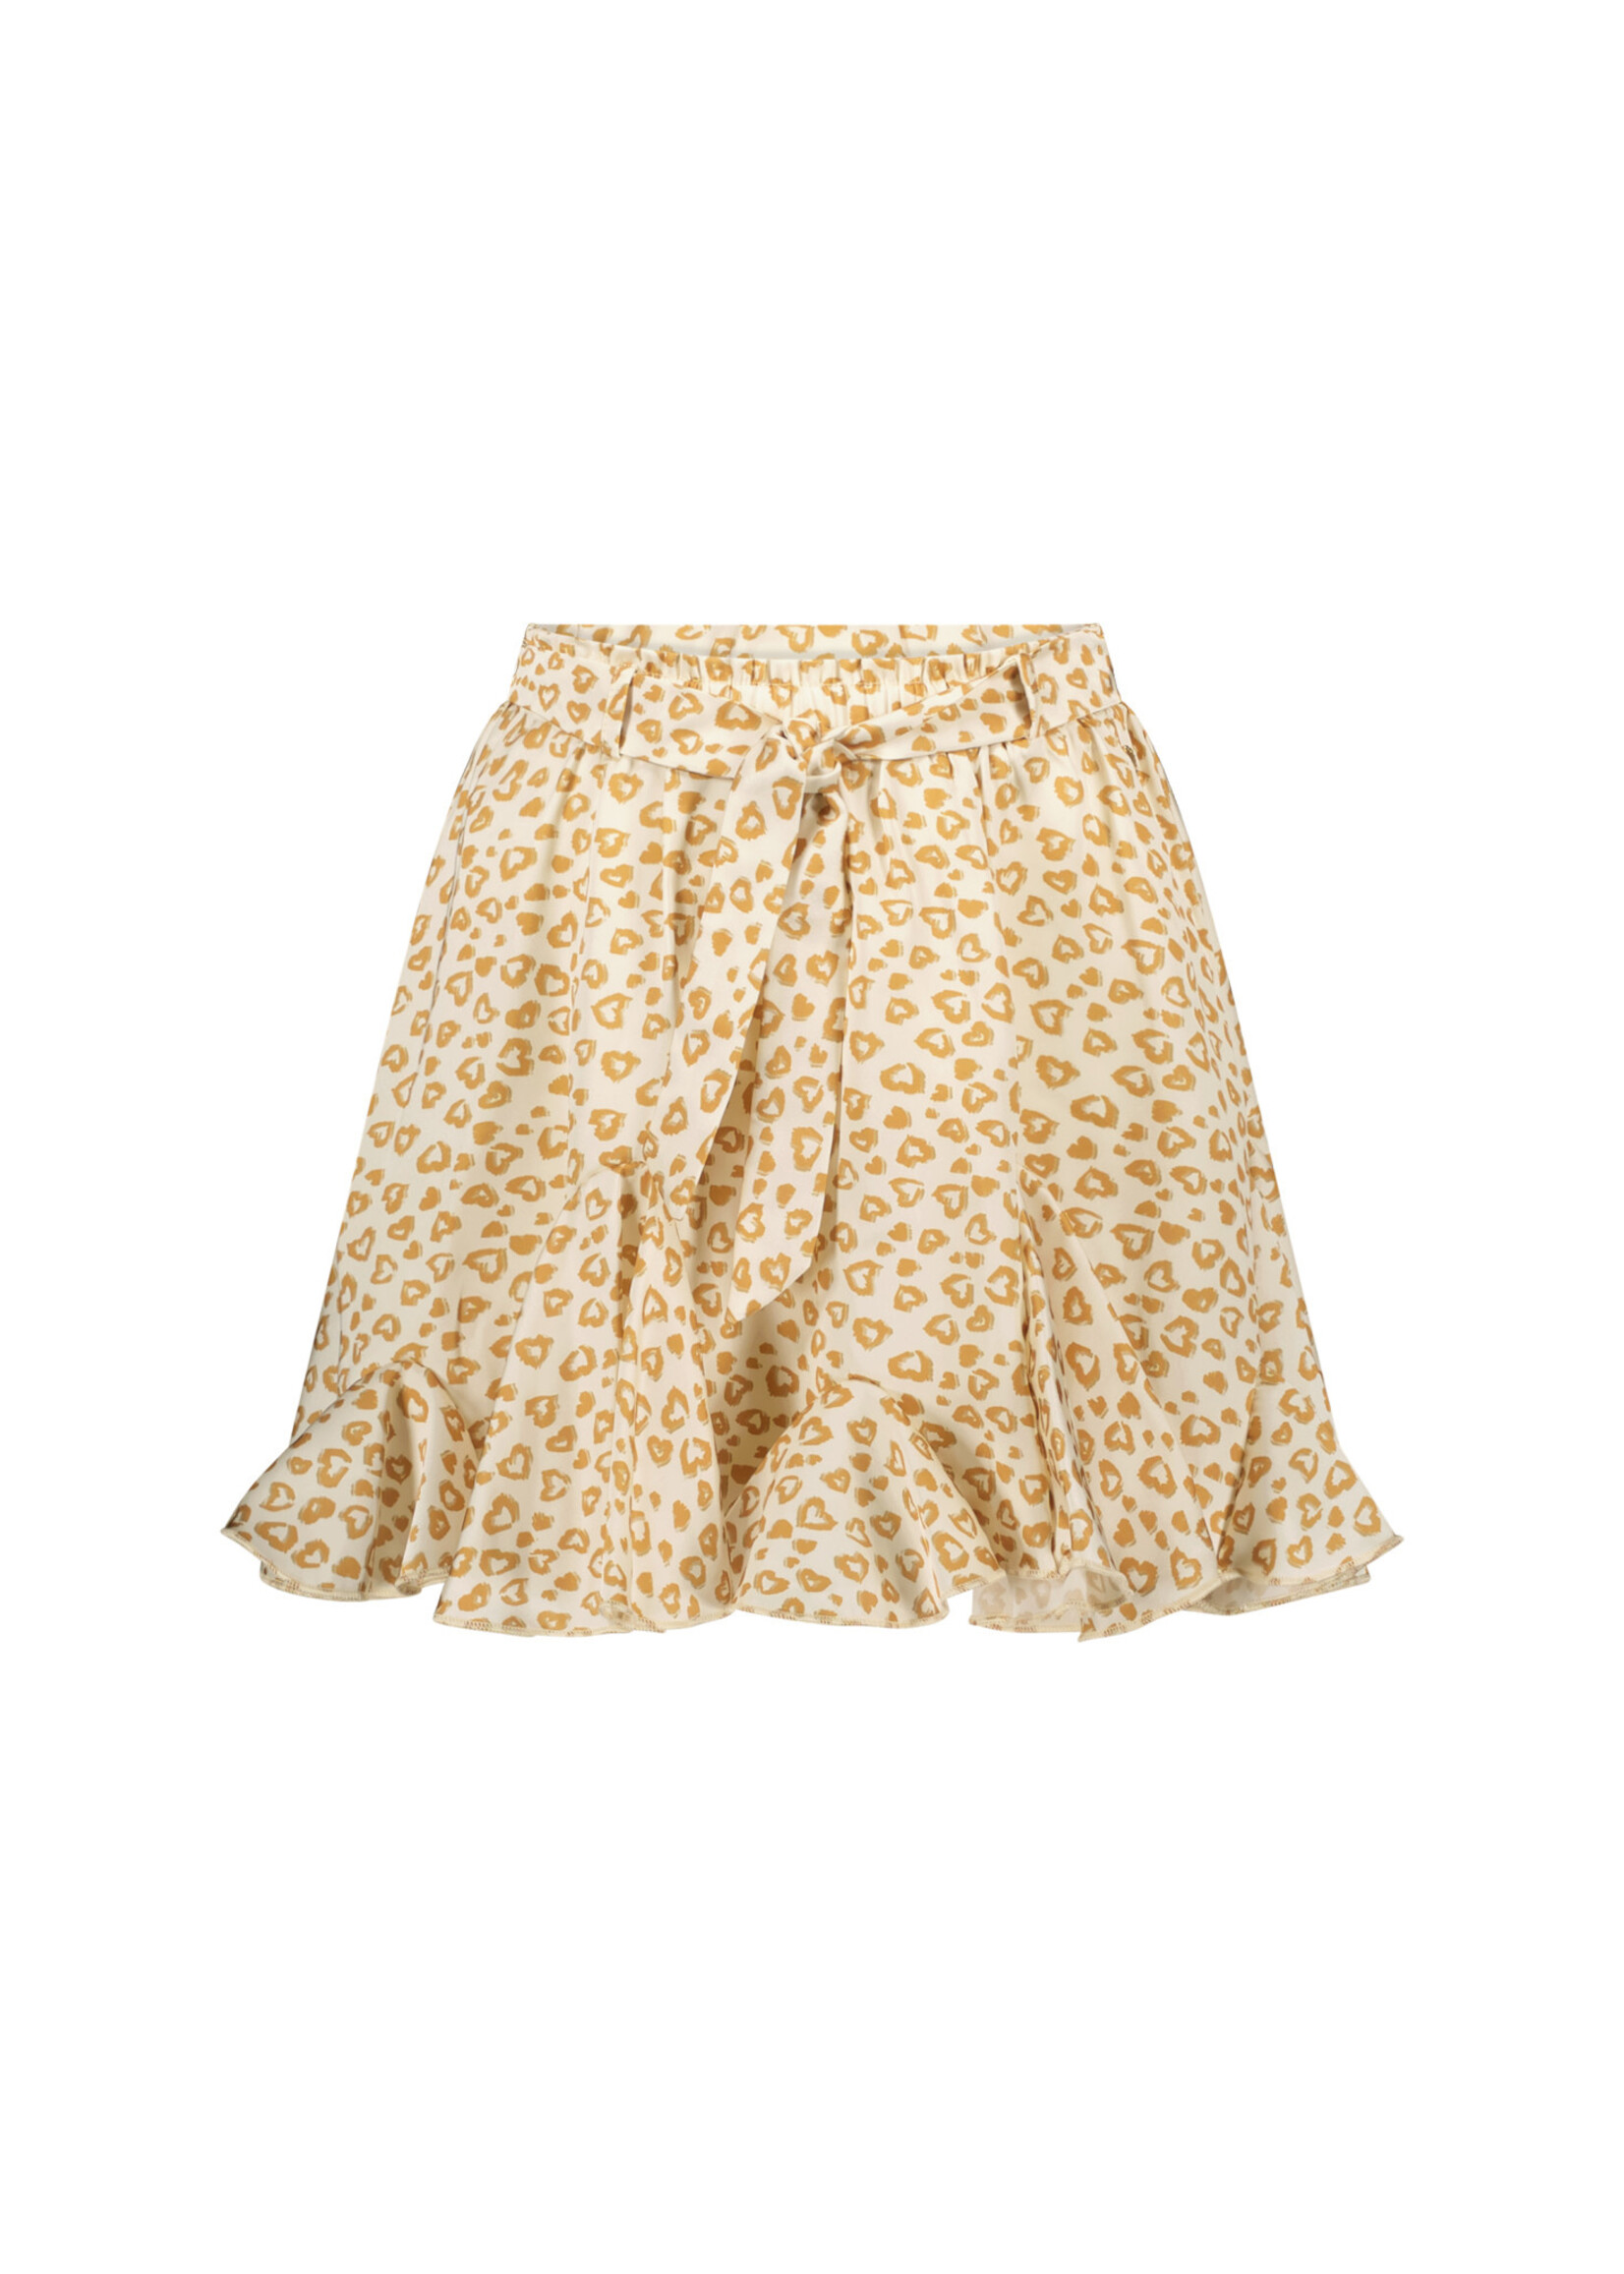 Le Chic Le Chic TECLA fancy leopard  skirt C308-5700 Pearled Ivory Leopard